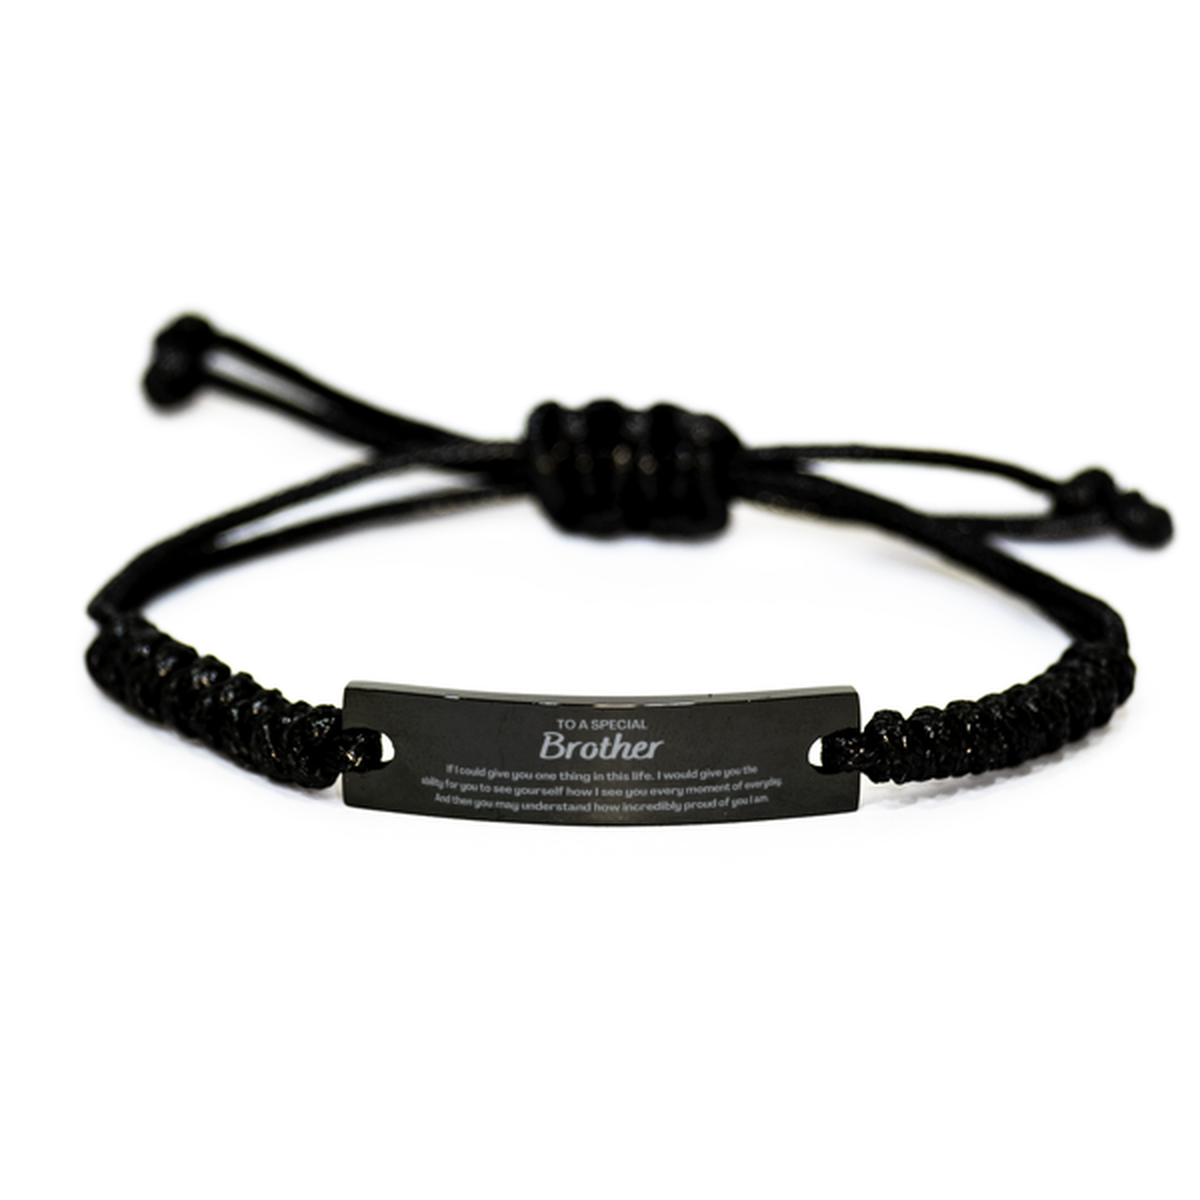 To My Brother Black Rope Bracelet, Gifts For Brother Engraved, Inspirational Gifts for Christmas Birthday, Epic Gifts for Brother To A Special Brother how incredibly proud of you I am